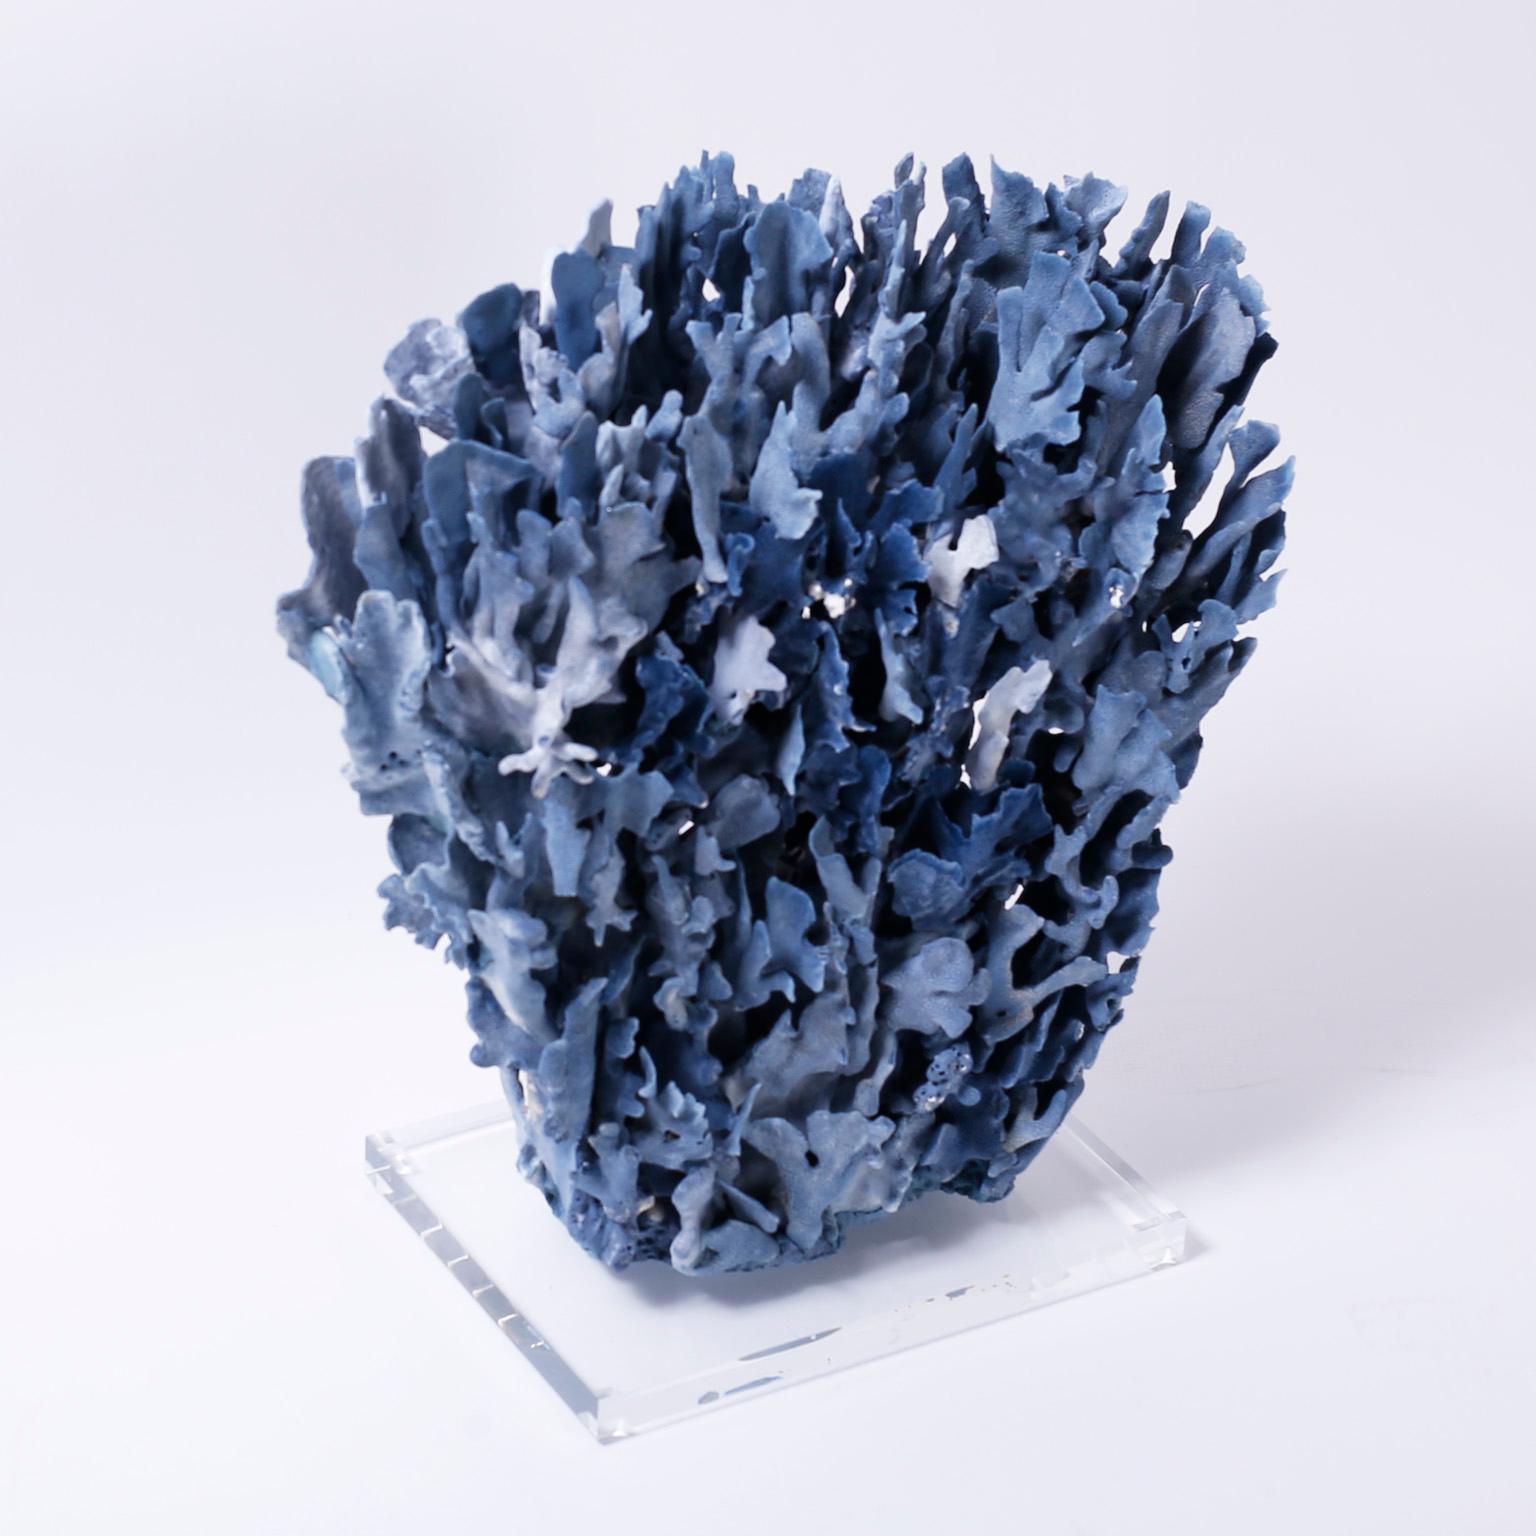 Impressive large blue coral sculpture or assemblage designed and crafted by F. S. Henemader with an alluring blue color and striking sea inspired texture and form. Presented on a Lucite base.

Coral being exported outside of the USA, requires